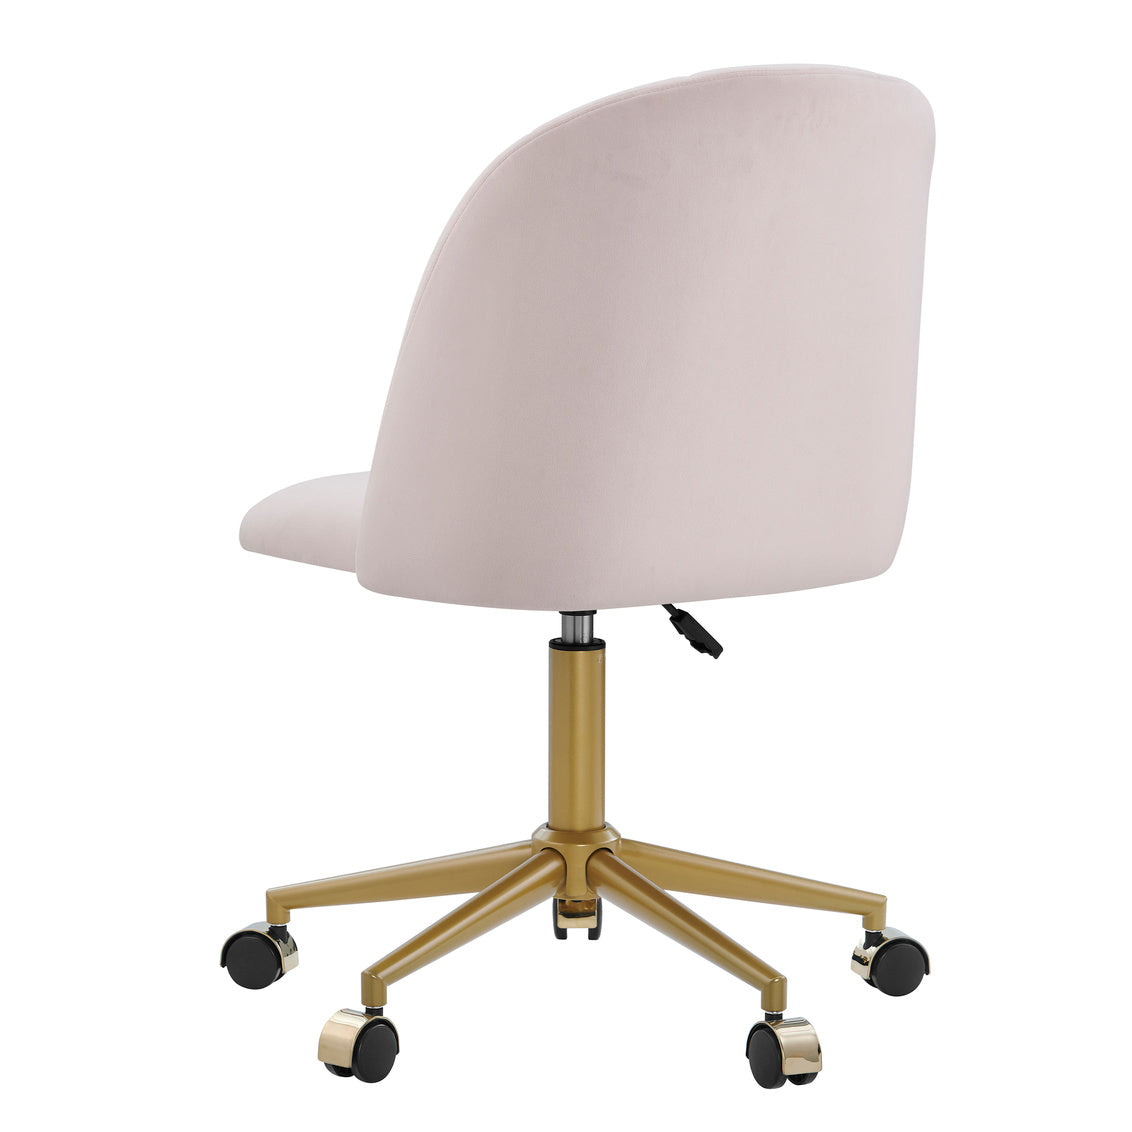 Abigail Pink Office Chair